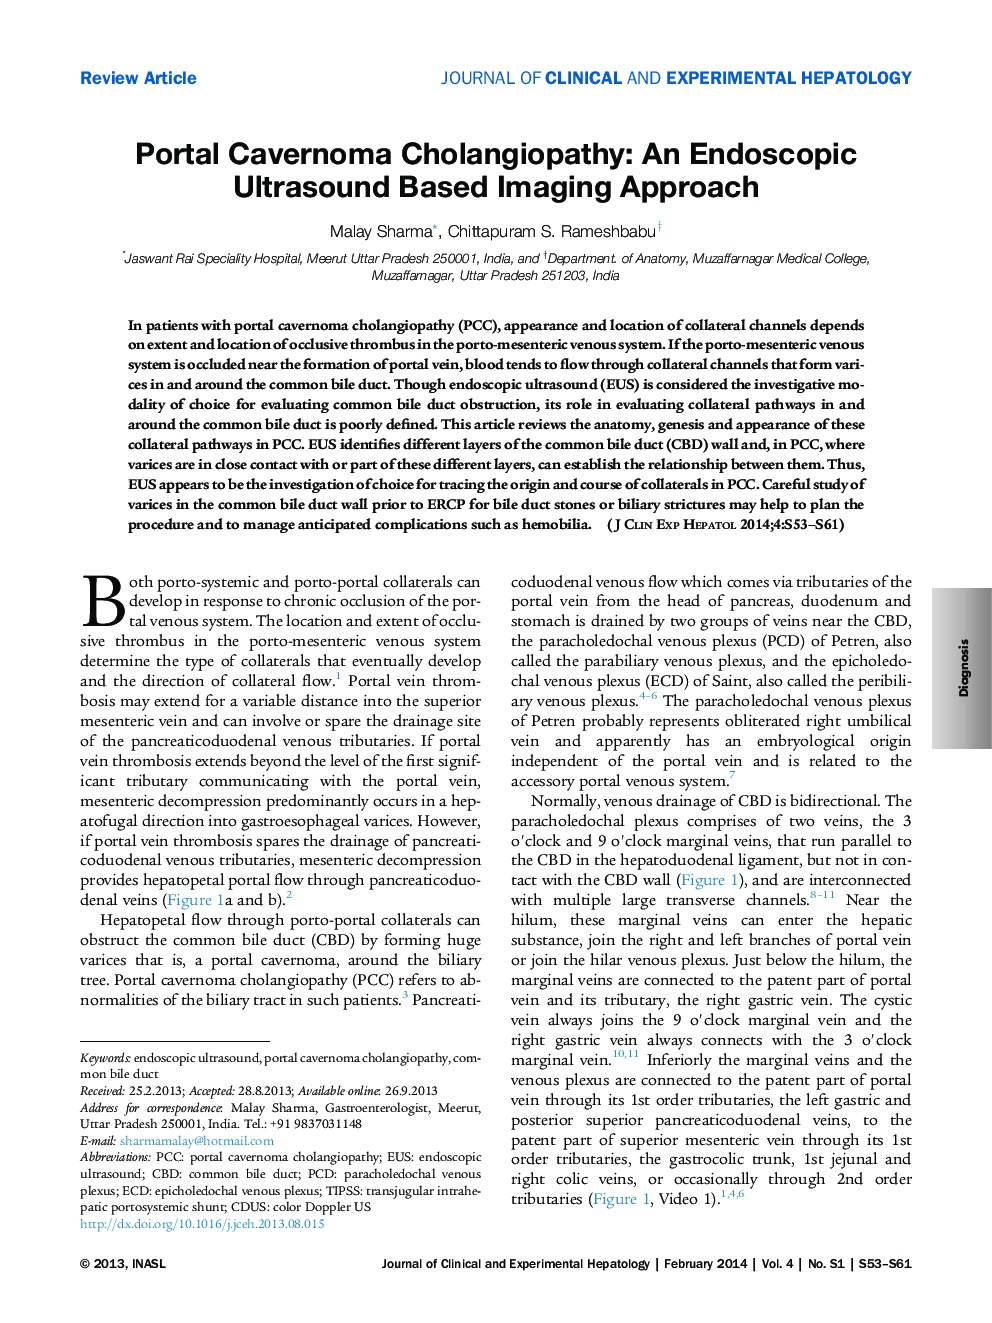 Portal Cavernoma Cholangiopathy: An Endoscopic Ultrasound Based Imaging Approach